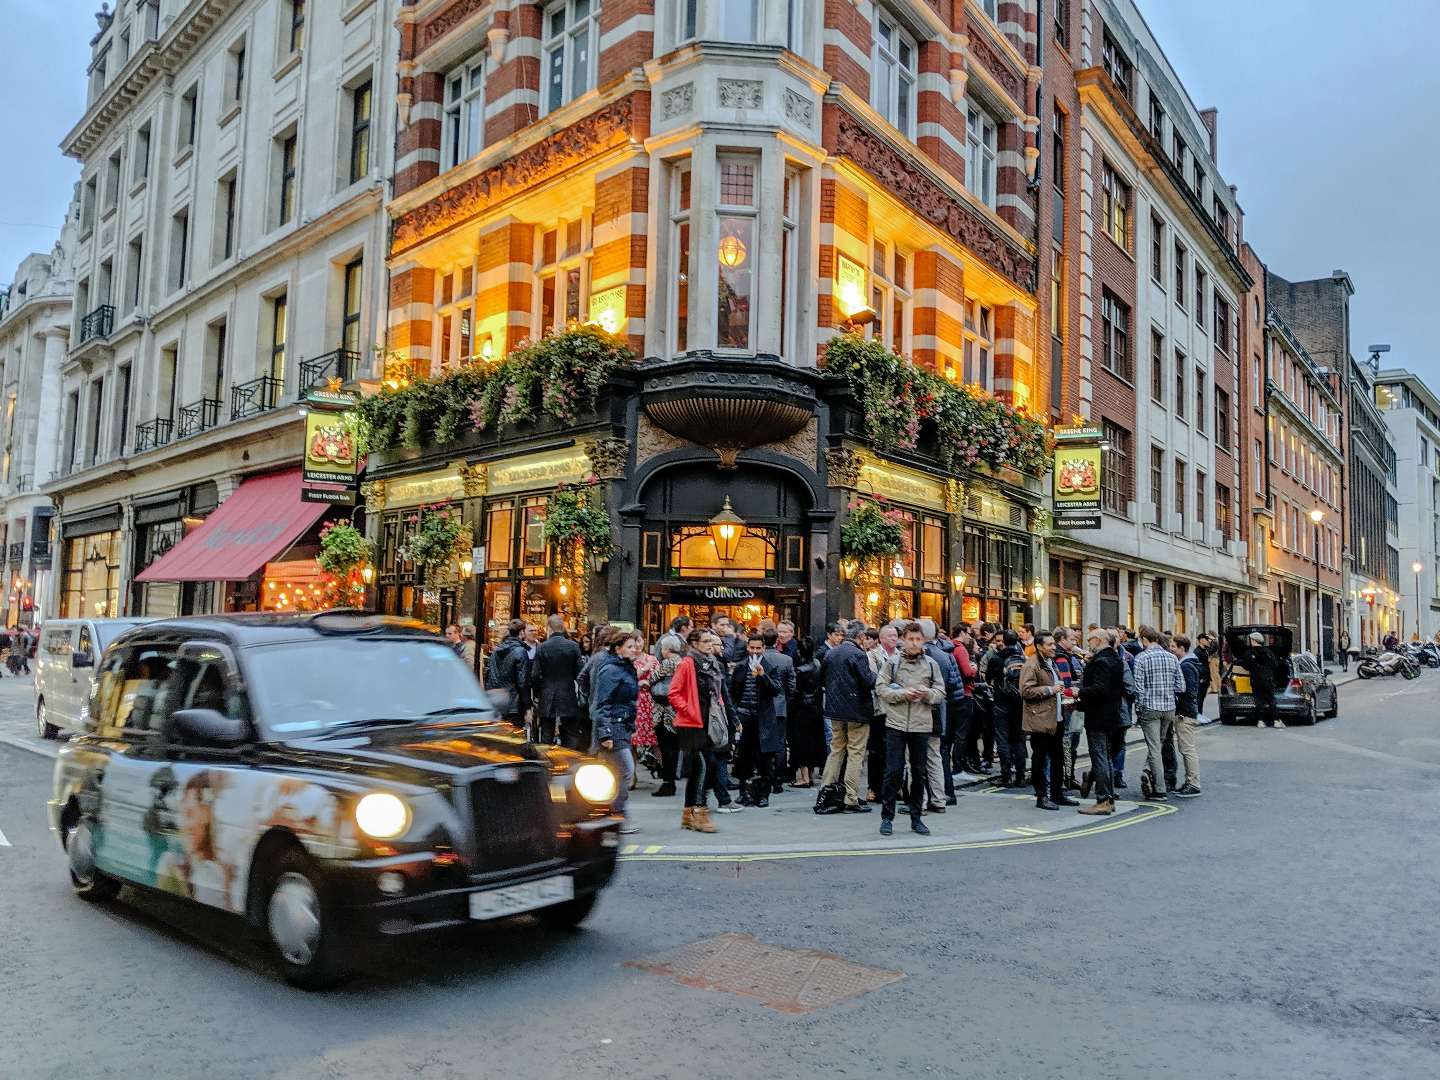 The benefits and challenges of pedestrianizing Central London